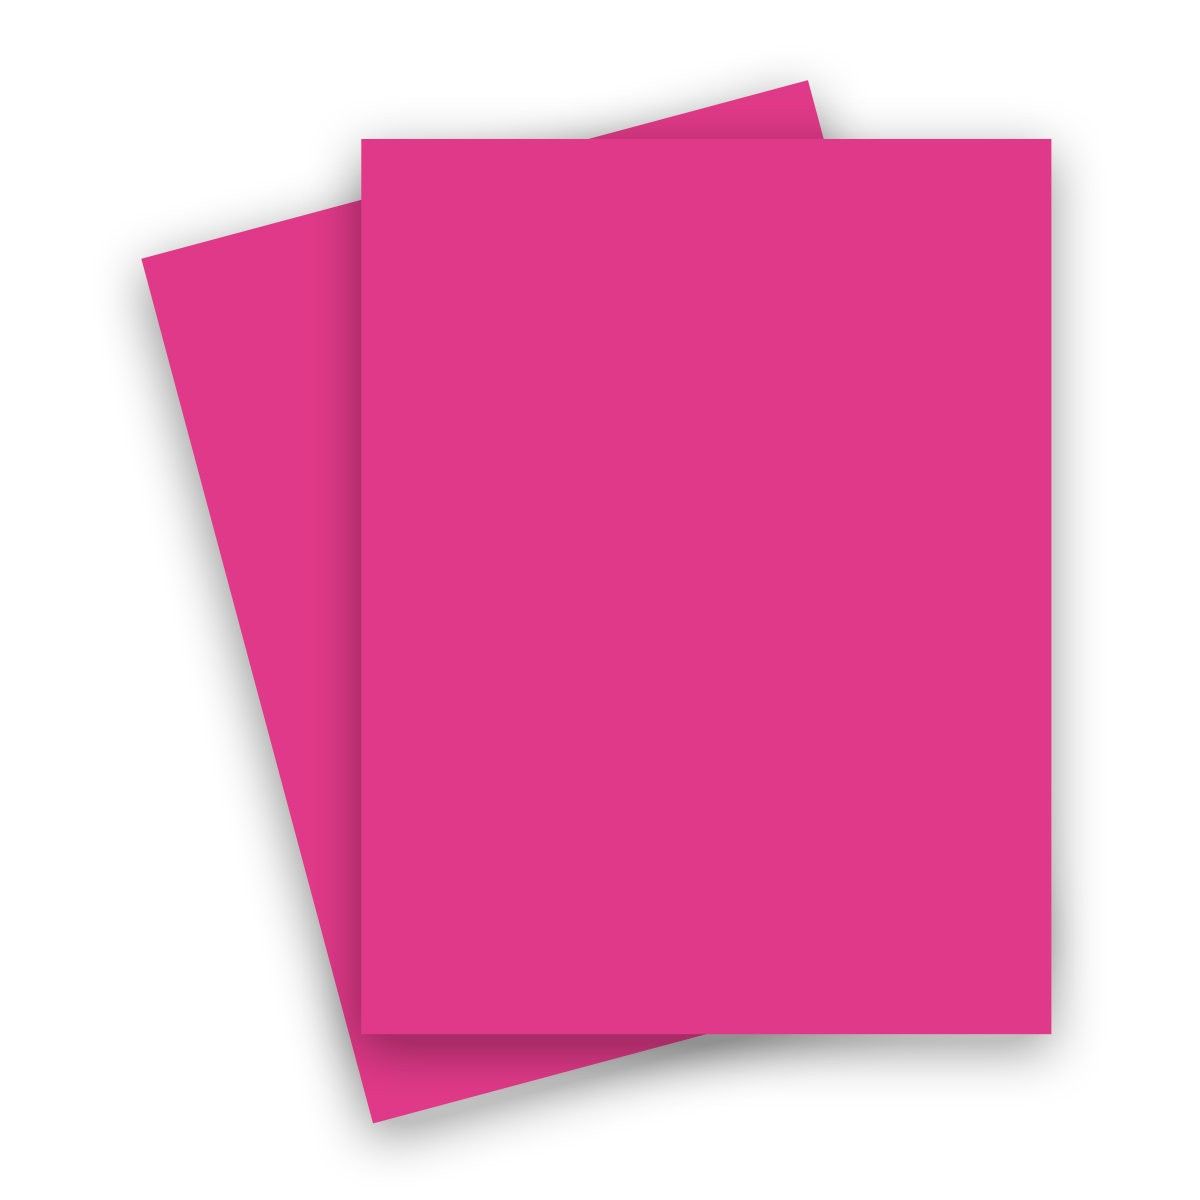 Basic Bright Pink (Razzle Berry) Card Stock Paper - 8.5 X 11 - 100Lb Cover  (270Gsm) - 100 Pk